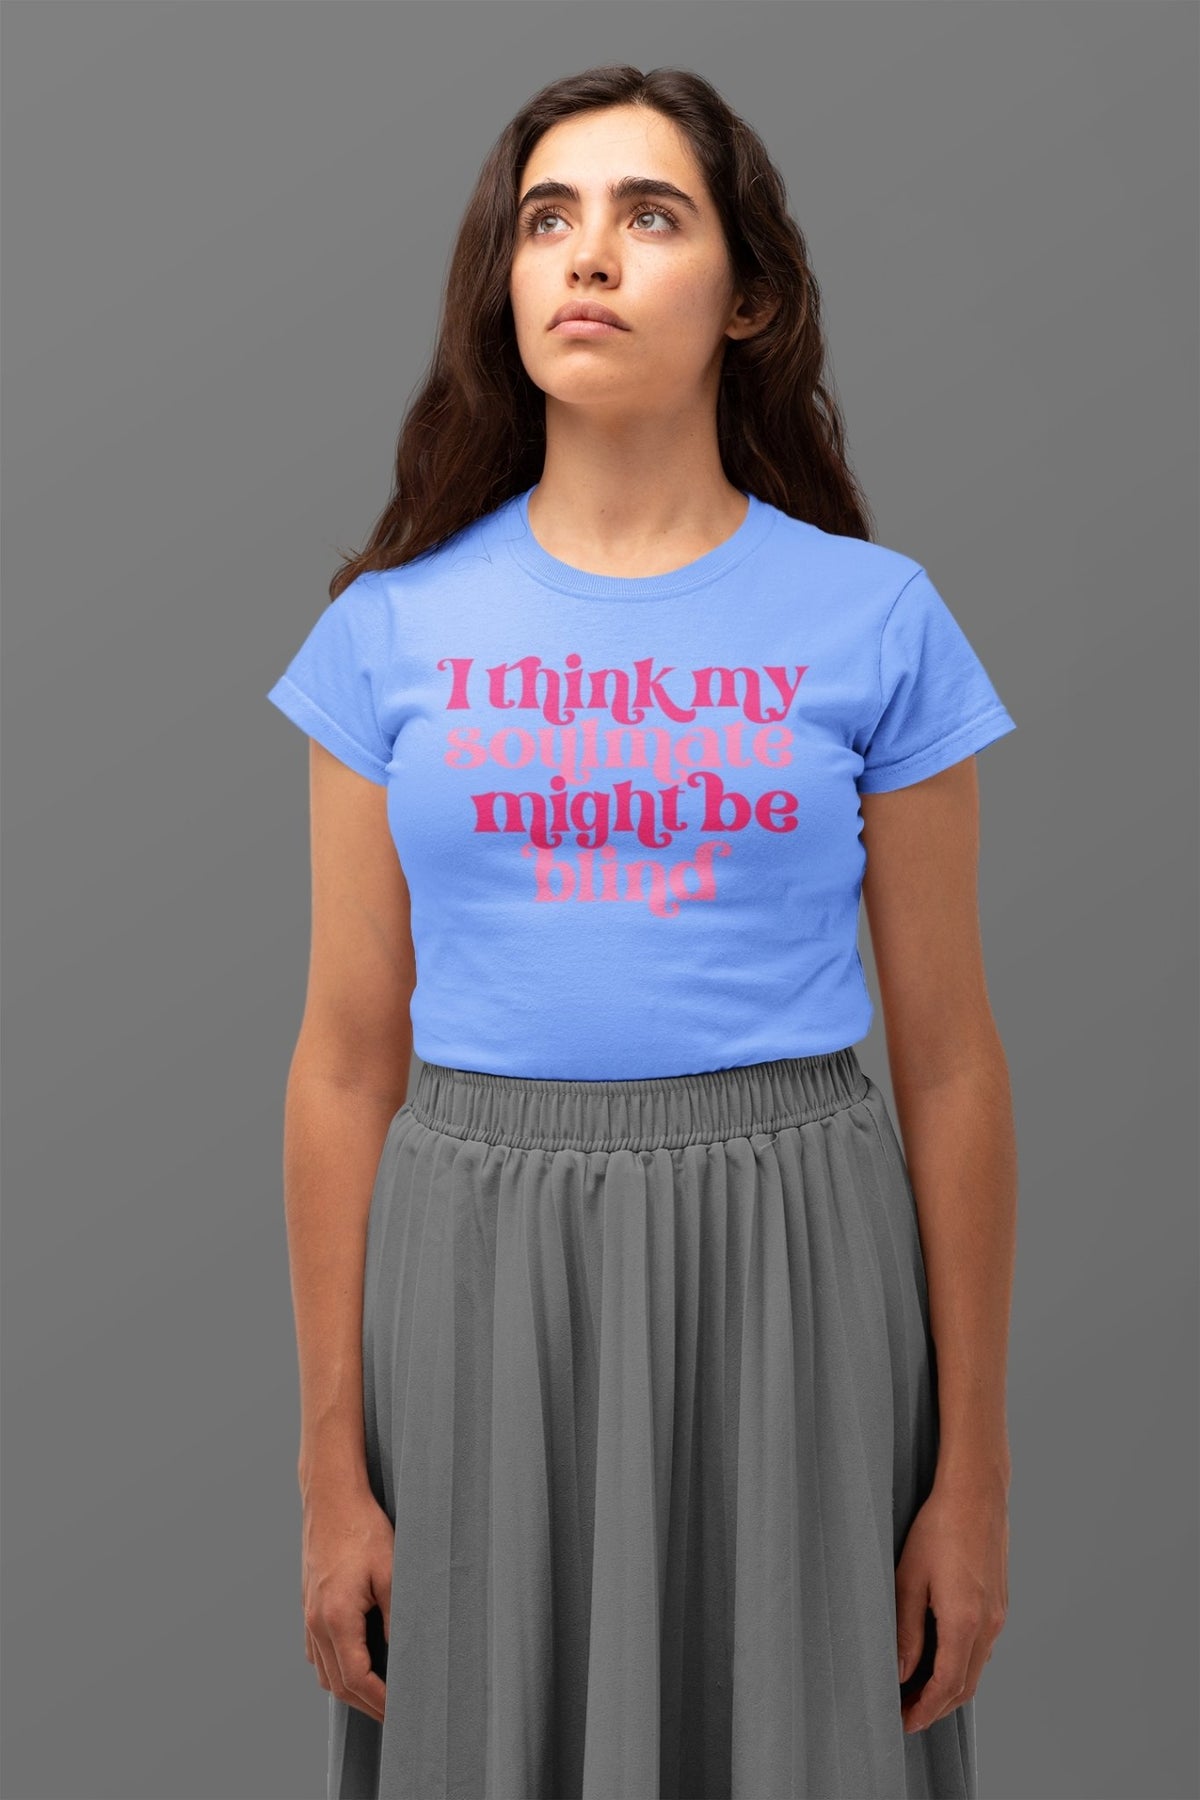 I Think My Soulmate Might Be Blind Women's Softstyle Tee - Salty Medic Clothing Co.